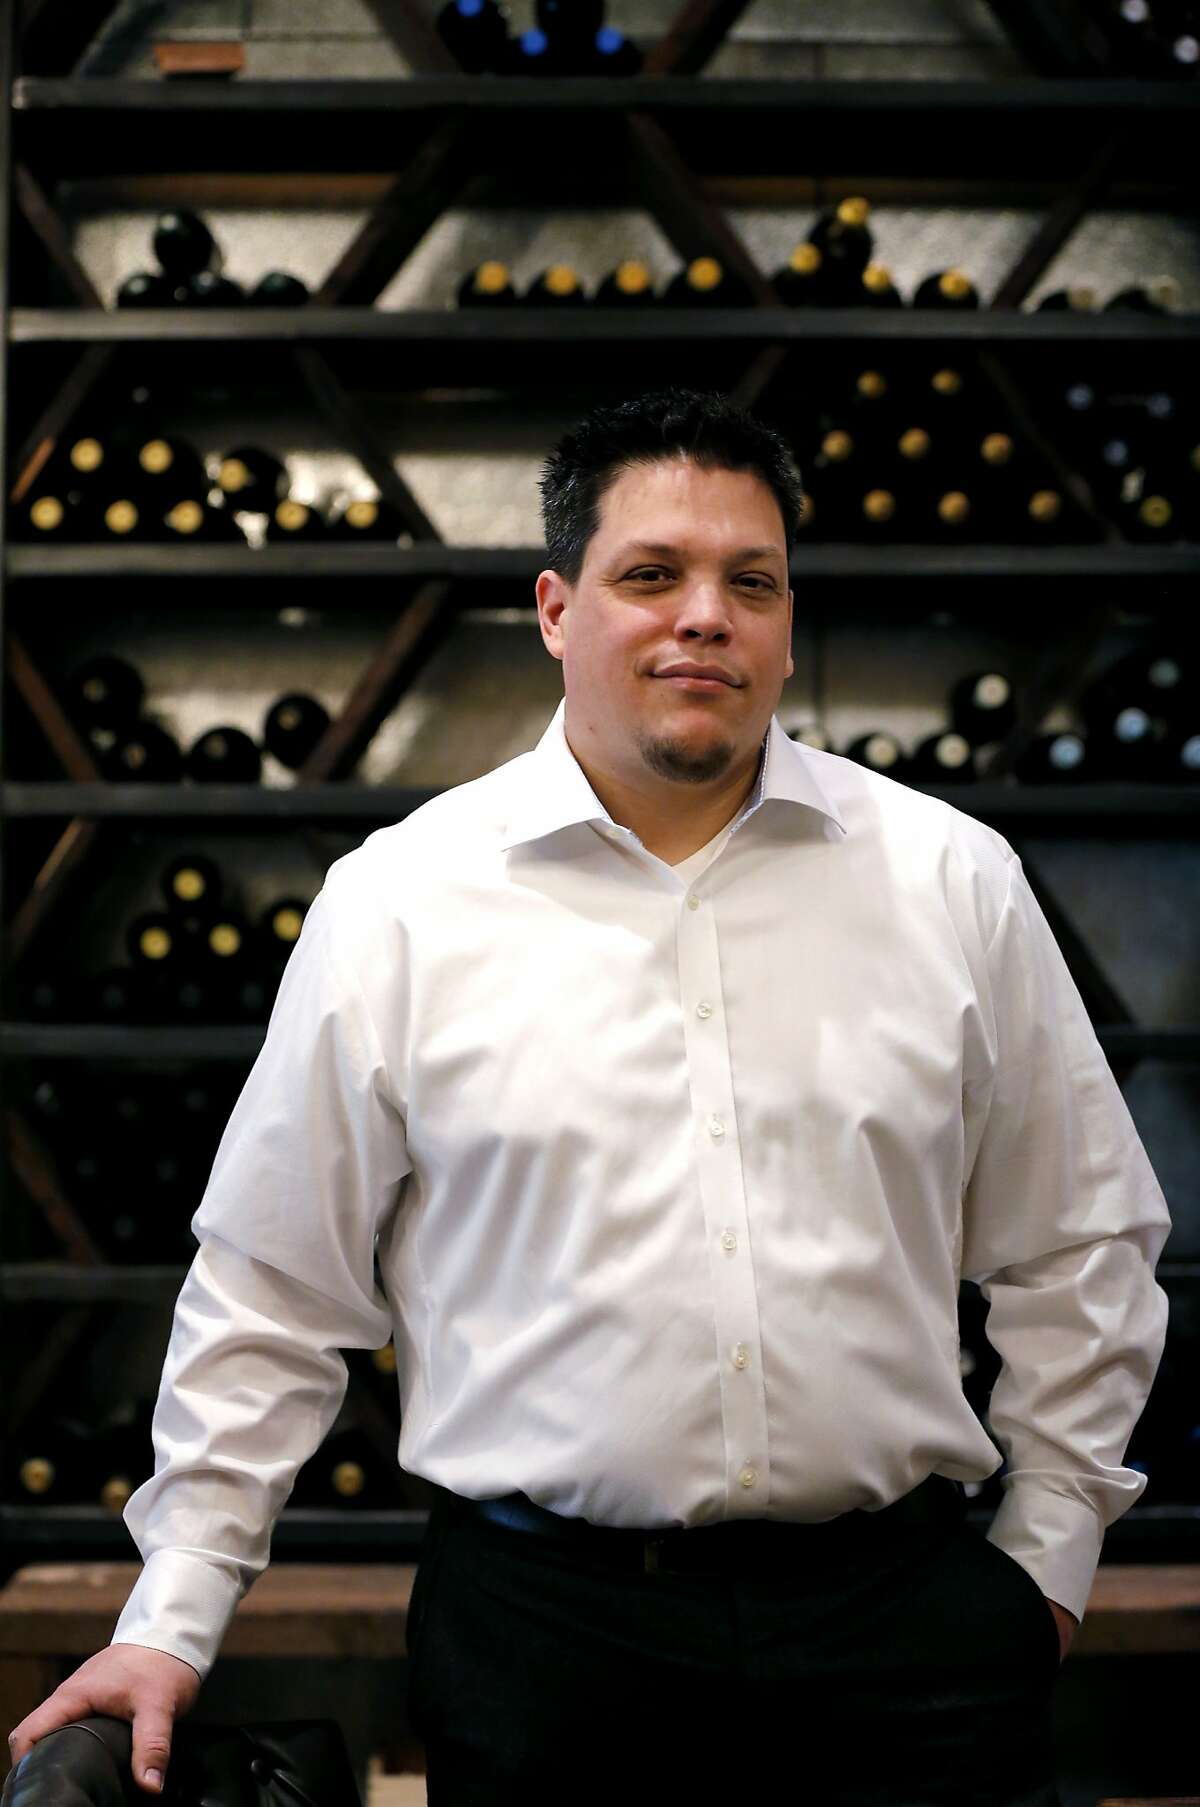 Kristian Cosentino, founder of Dirty Water and self-described "beverage geek," stands in front of a tall wine rack in his restaurant in San Francisco, California, on Tuesday, June 23, 2015. A